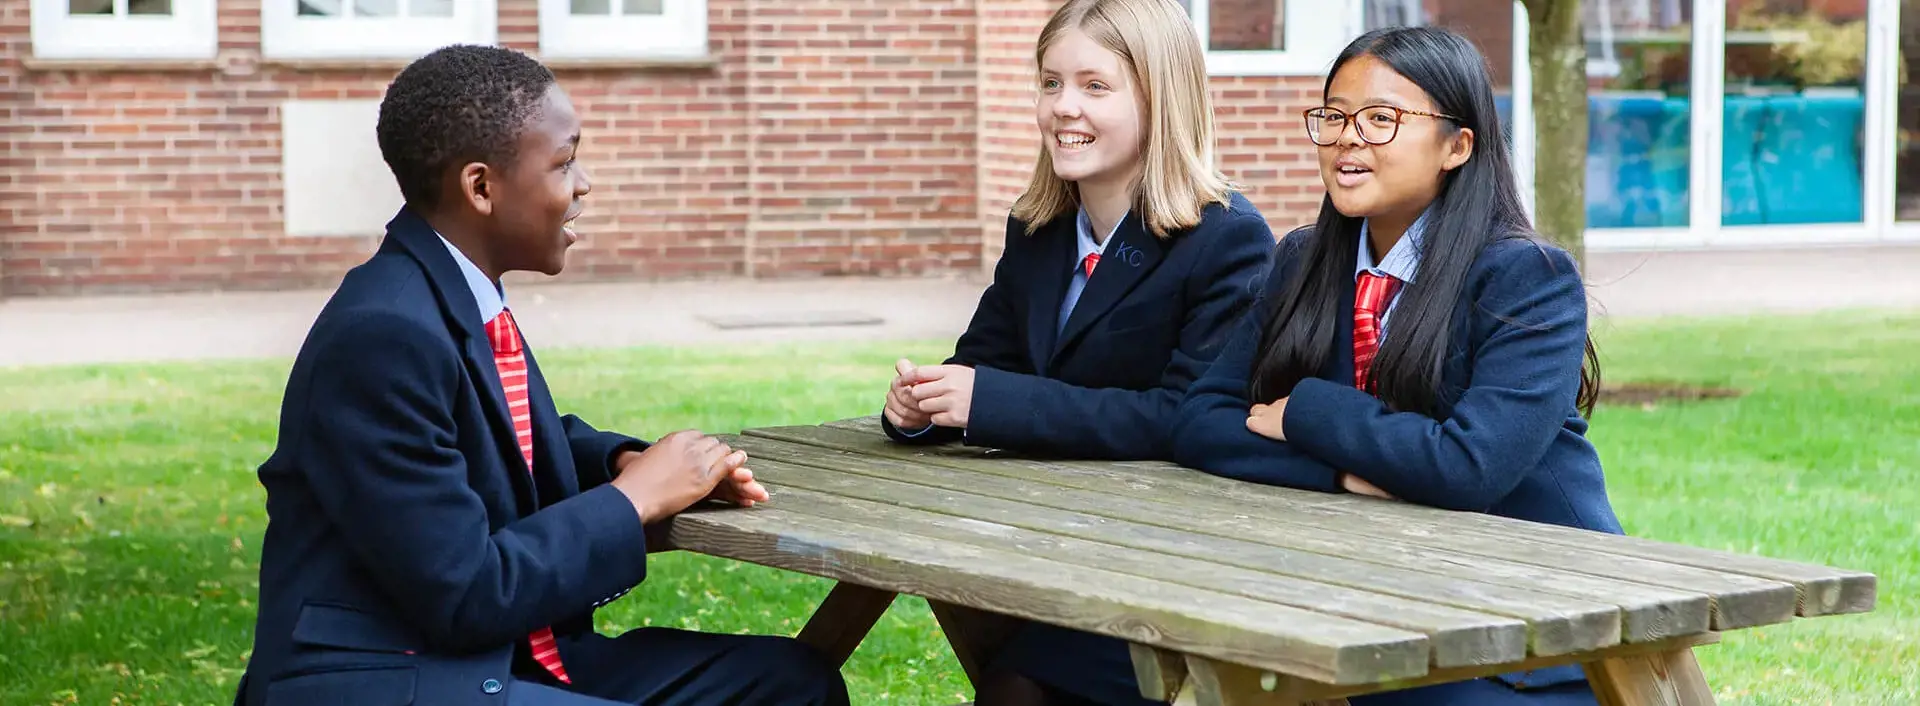 Pupils sitting in the quad on a bench